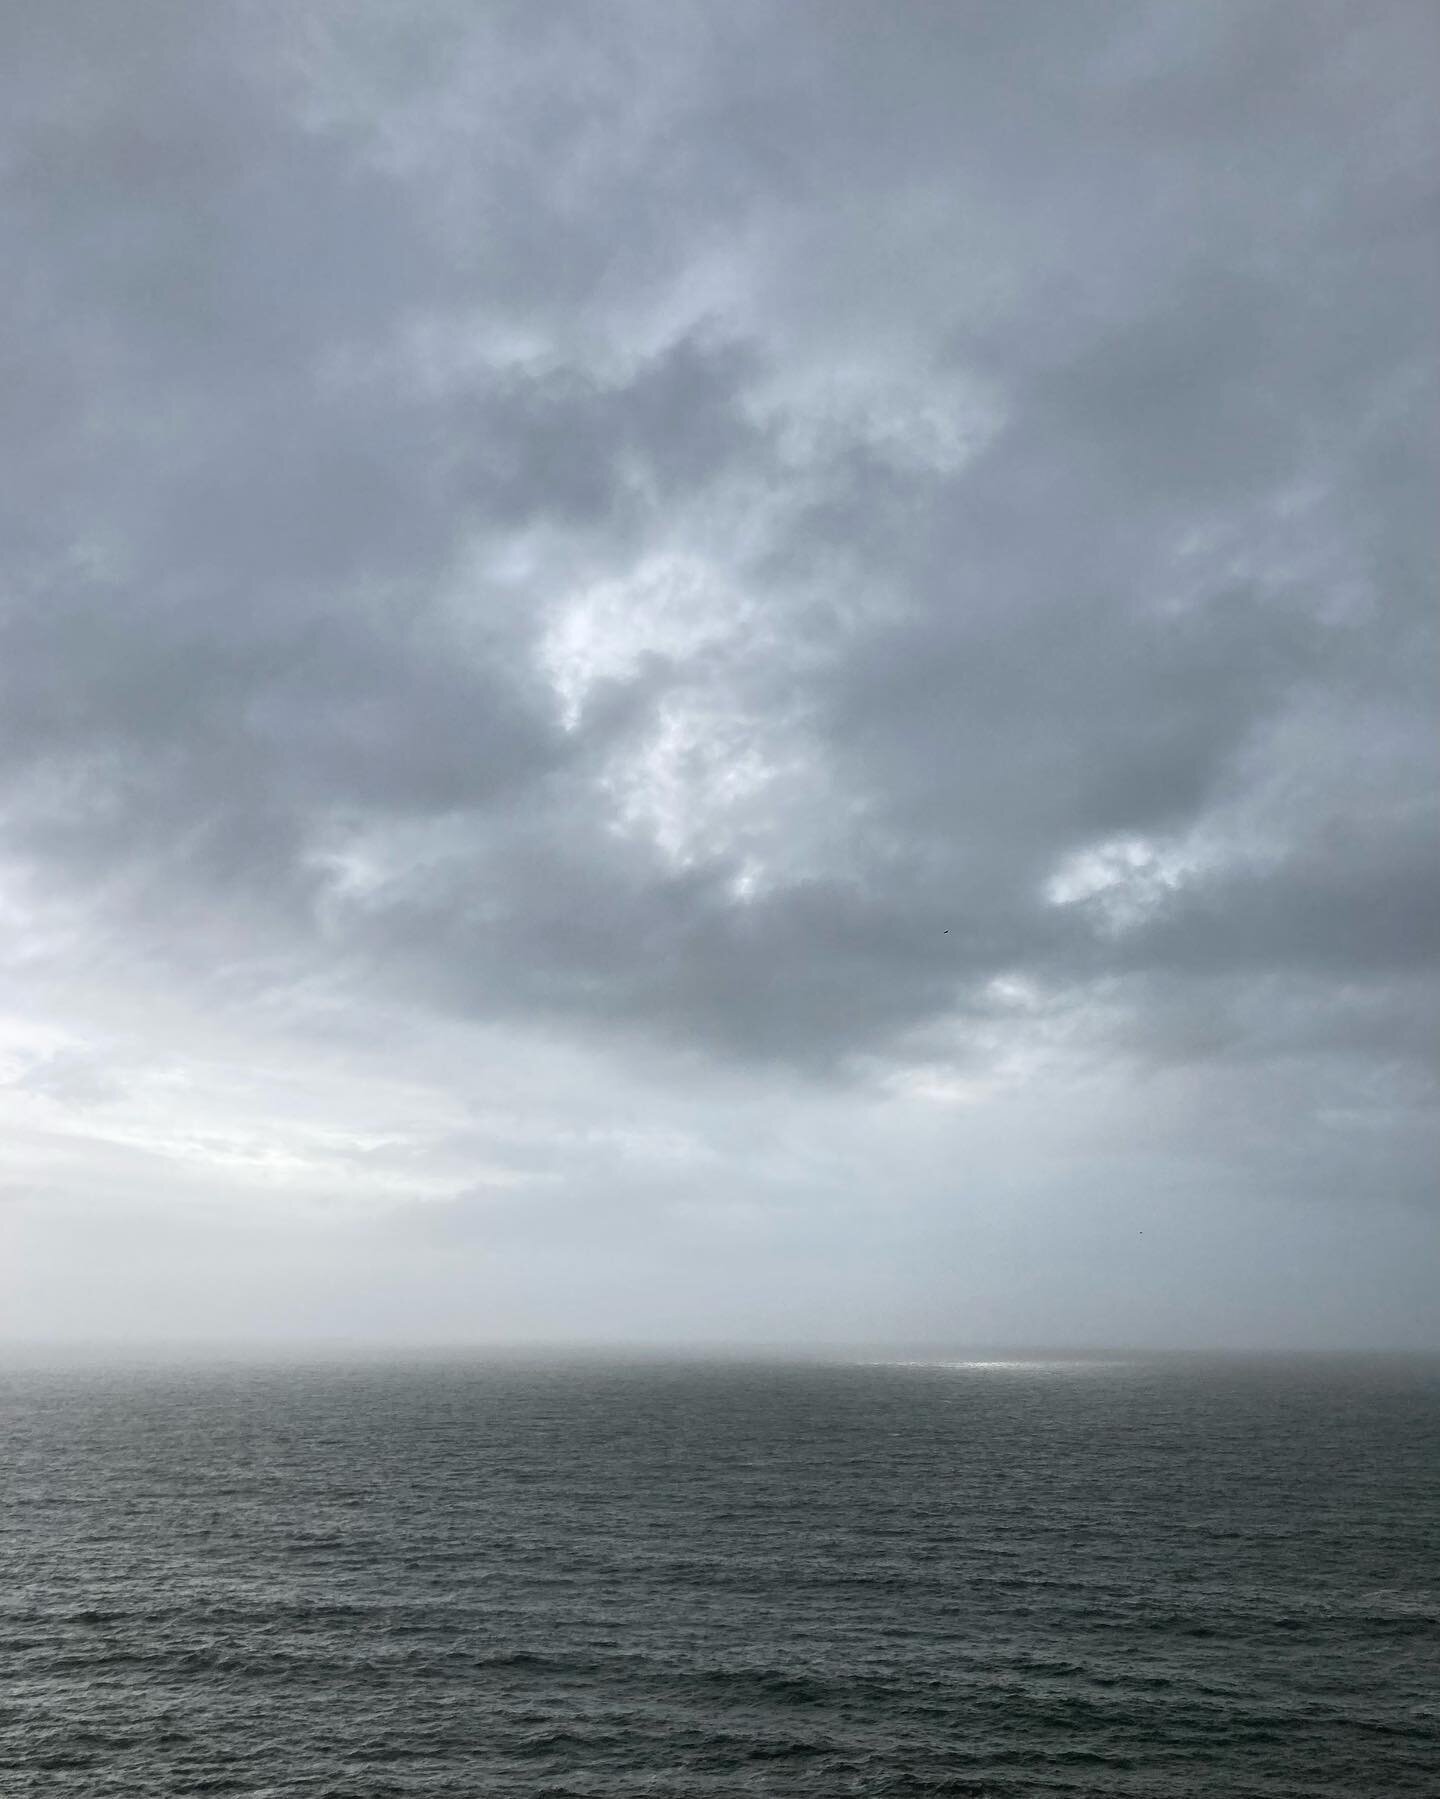 Painting the sky &hellip; a brief break in the storm clouds and an impromptu drive along the coast to adjust the focal point + expand the horizon line

#cloudappreciation 
#atmosphericriver
#mytinyatlas